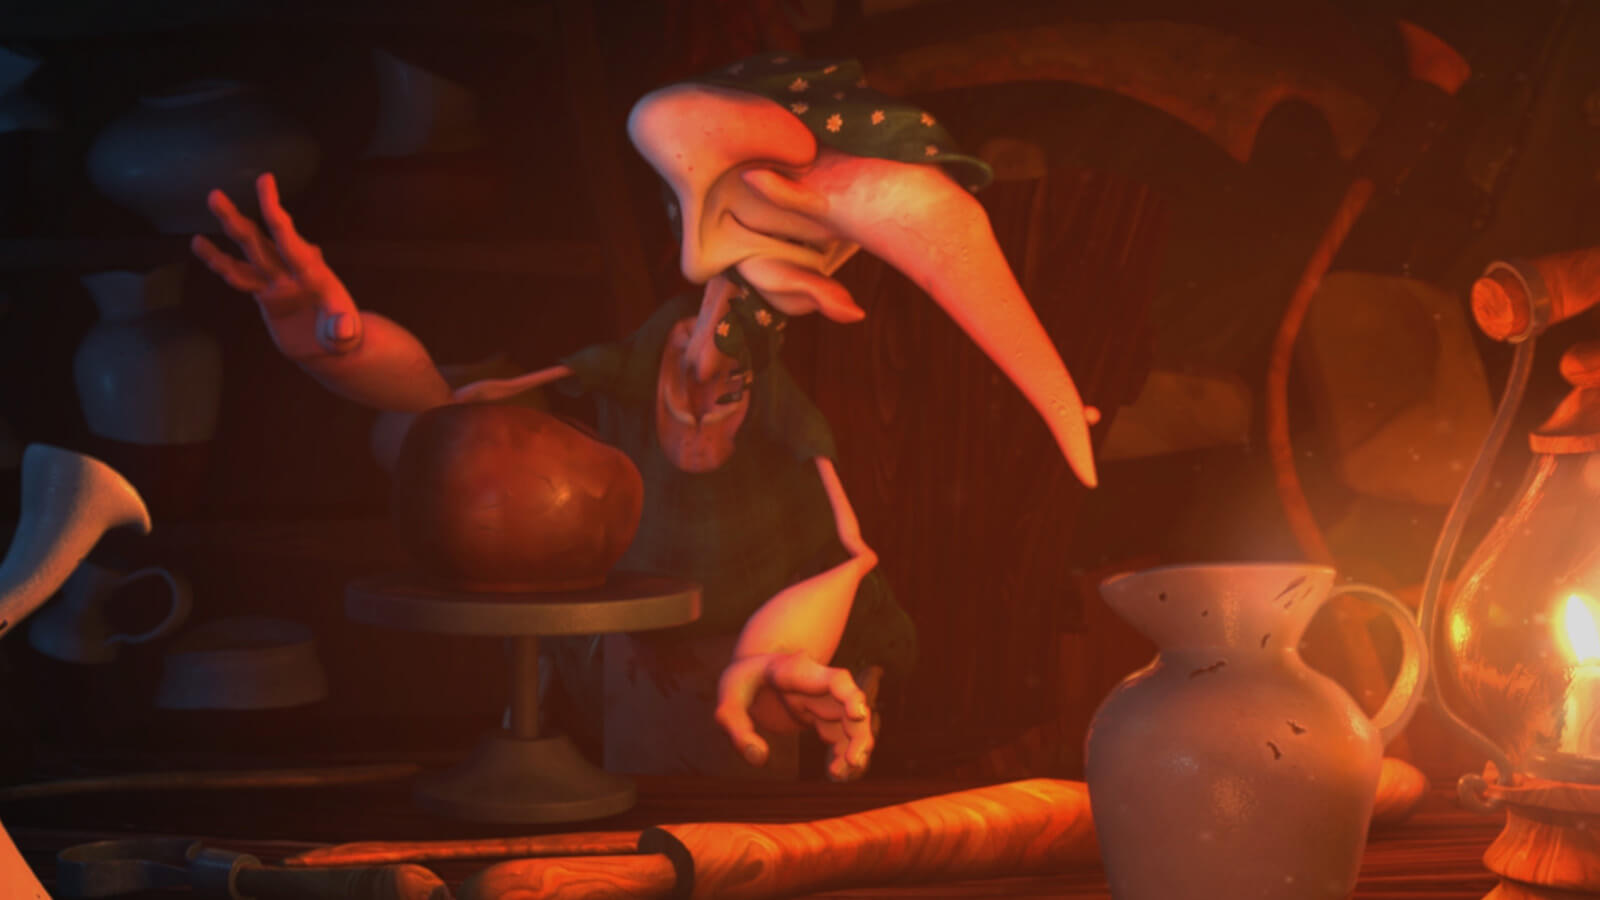 An old woman with a long nose is surrounded by pottery in a room lit by firelight.